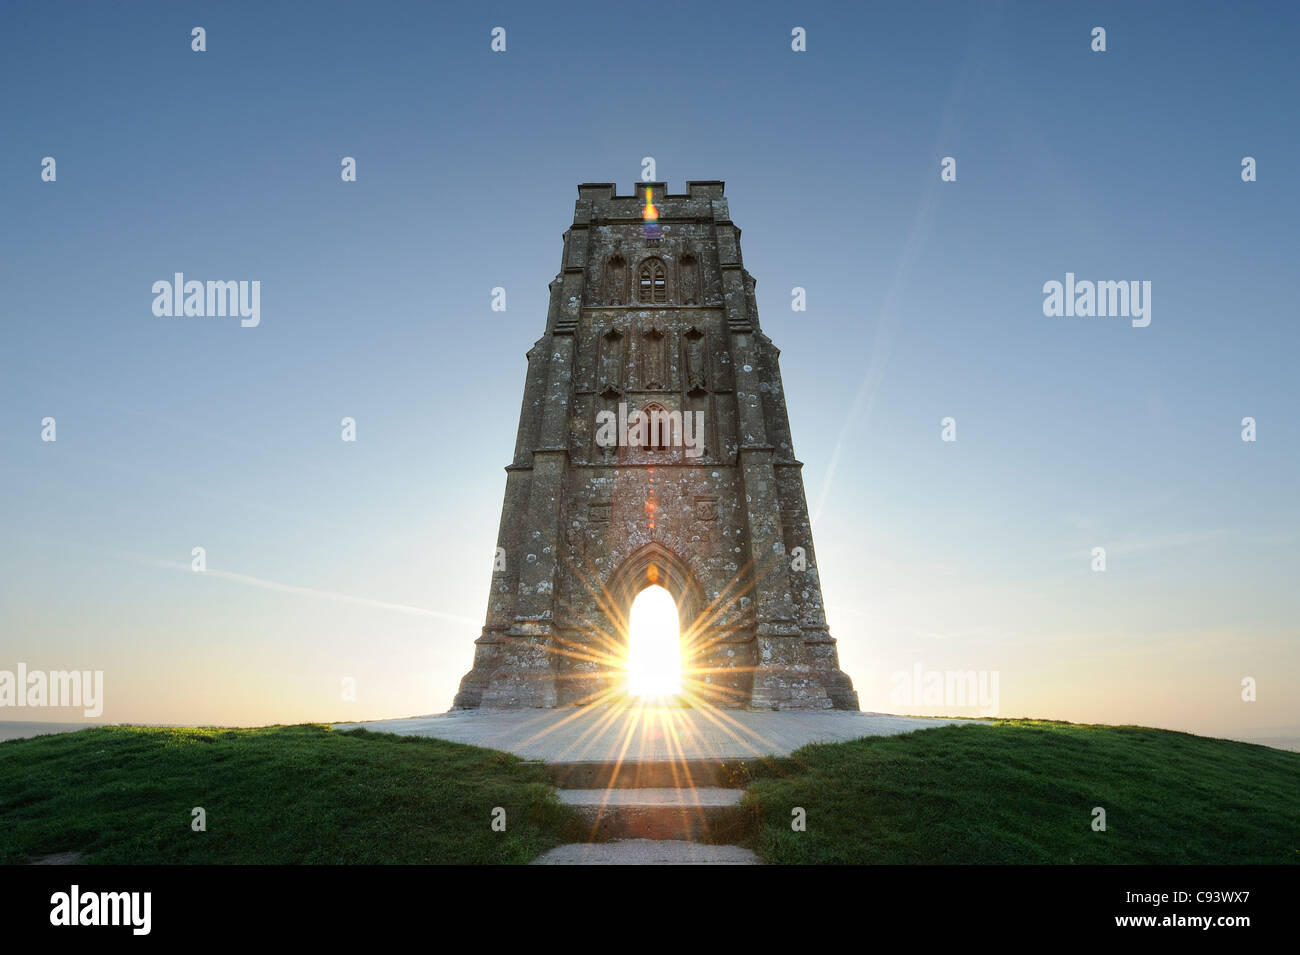 St Michael's tower atop Glastonbury Tor, Somerset, with the rising sun visible through the tower's archway. Stock Photo